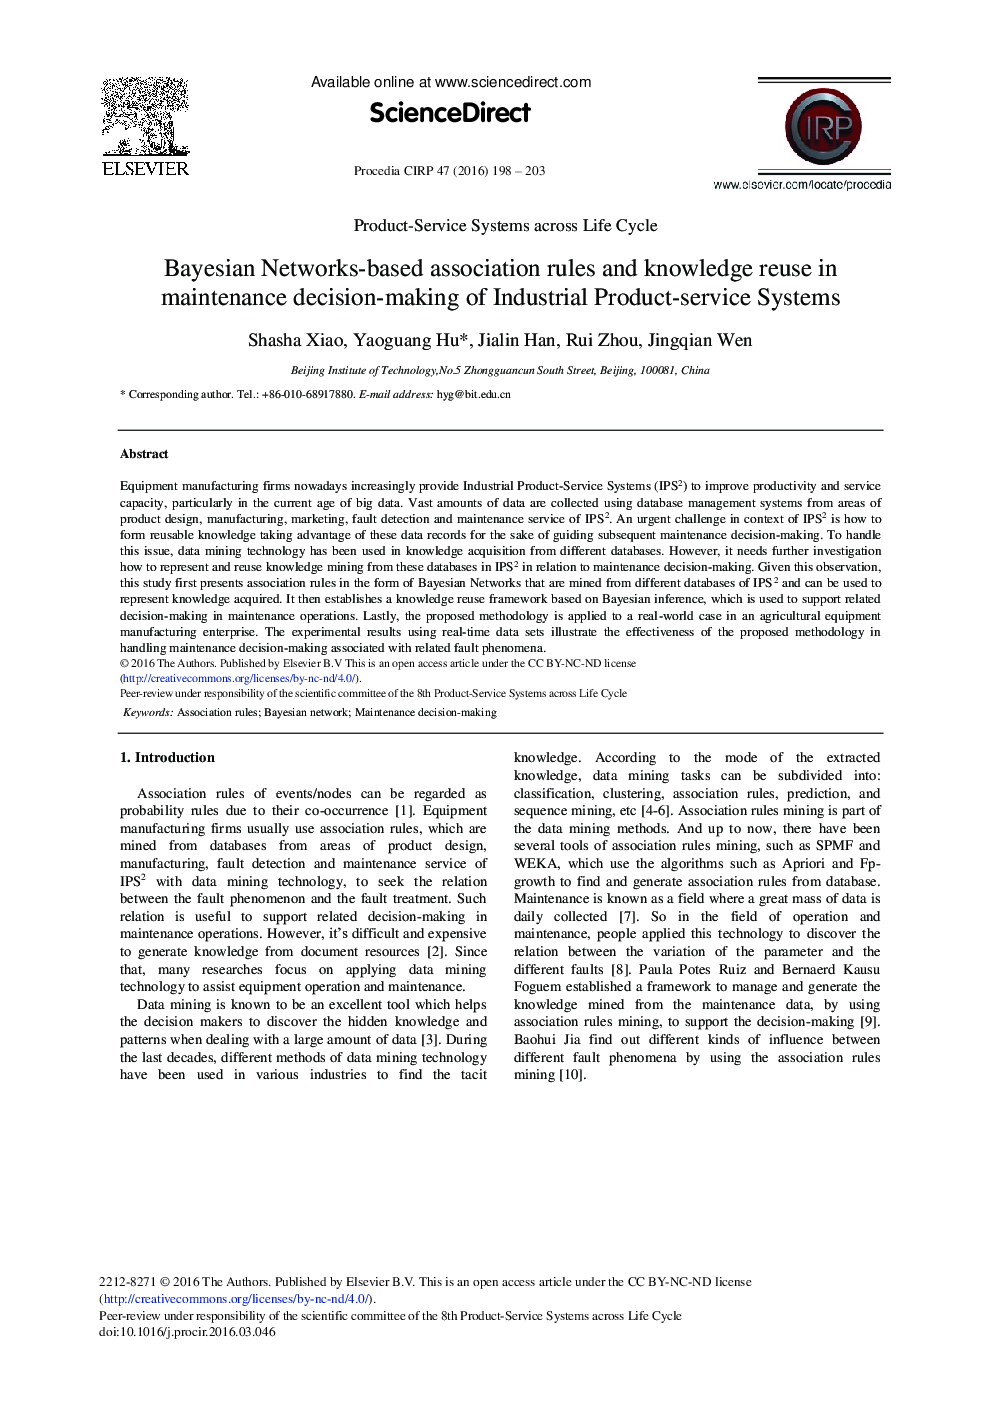 Bayesian Networks-based Association Rules and Knowledge Reuse in Maintenance Decision-Making of Industrial Product-Service Systems 